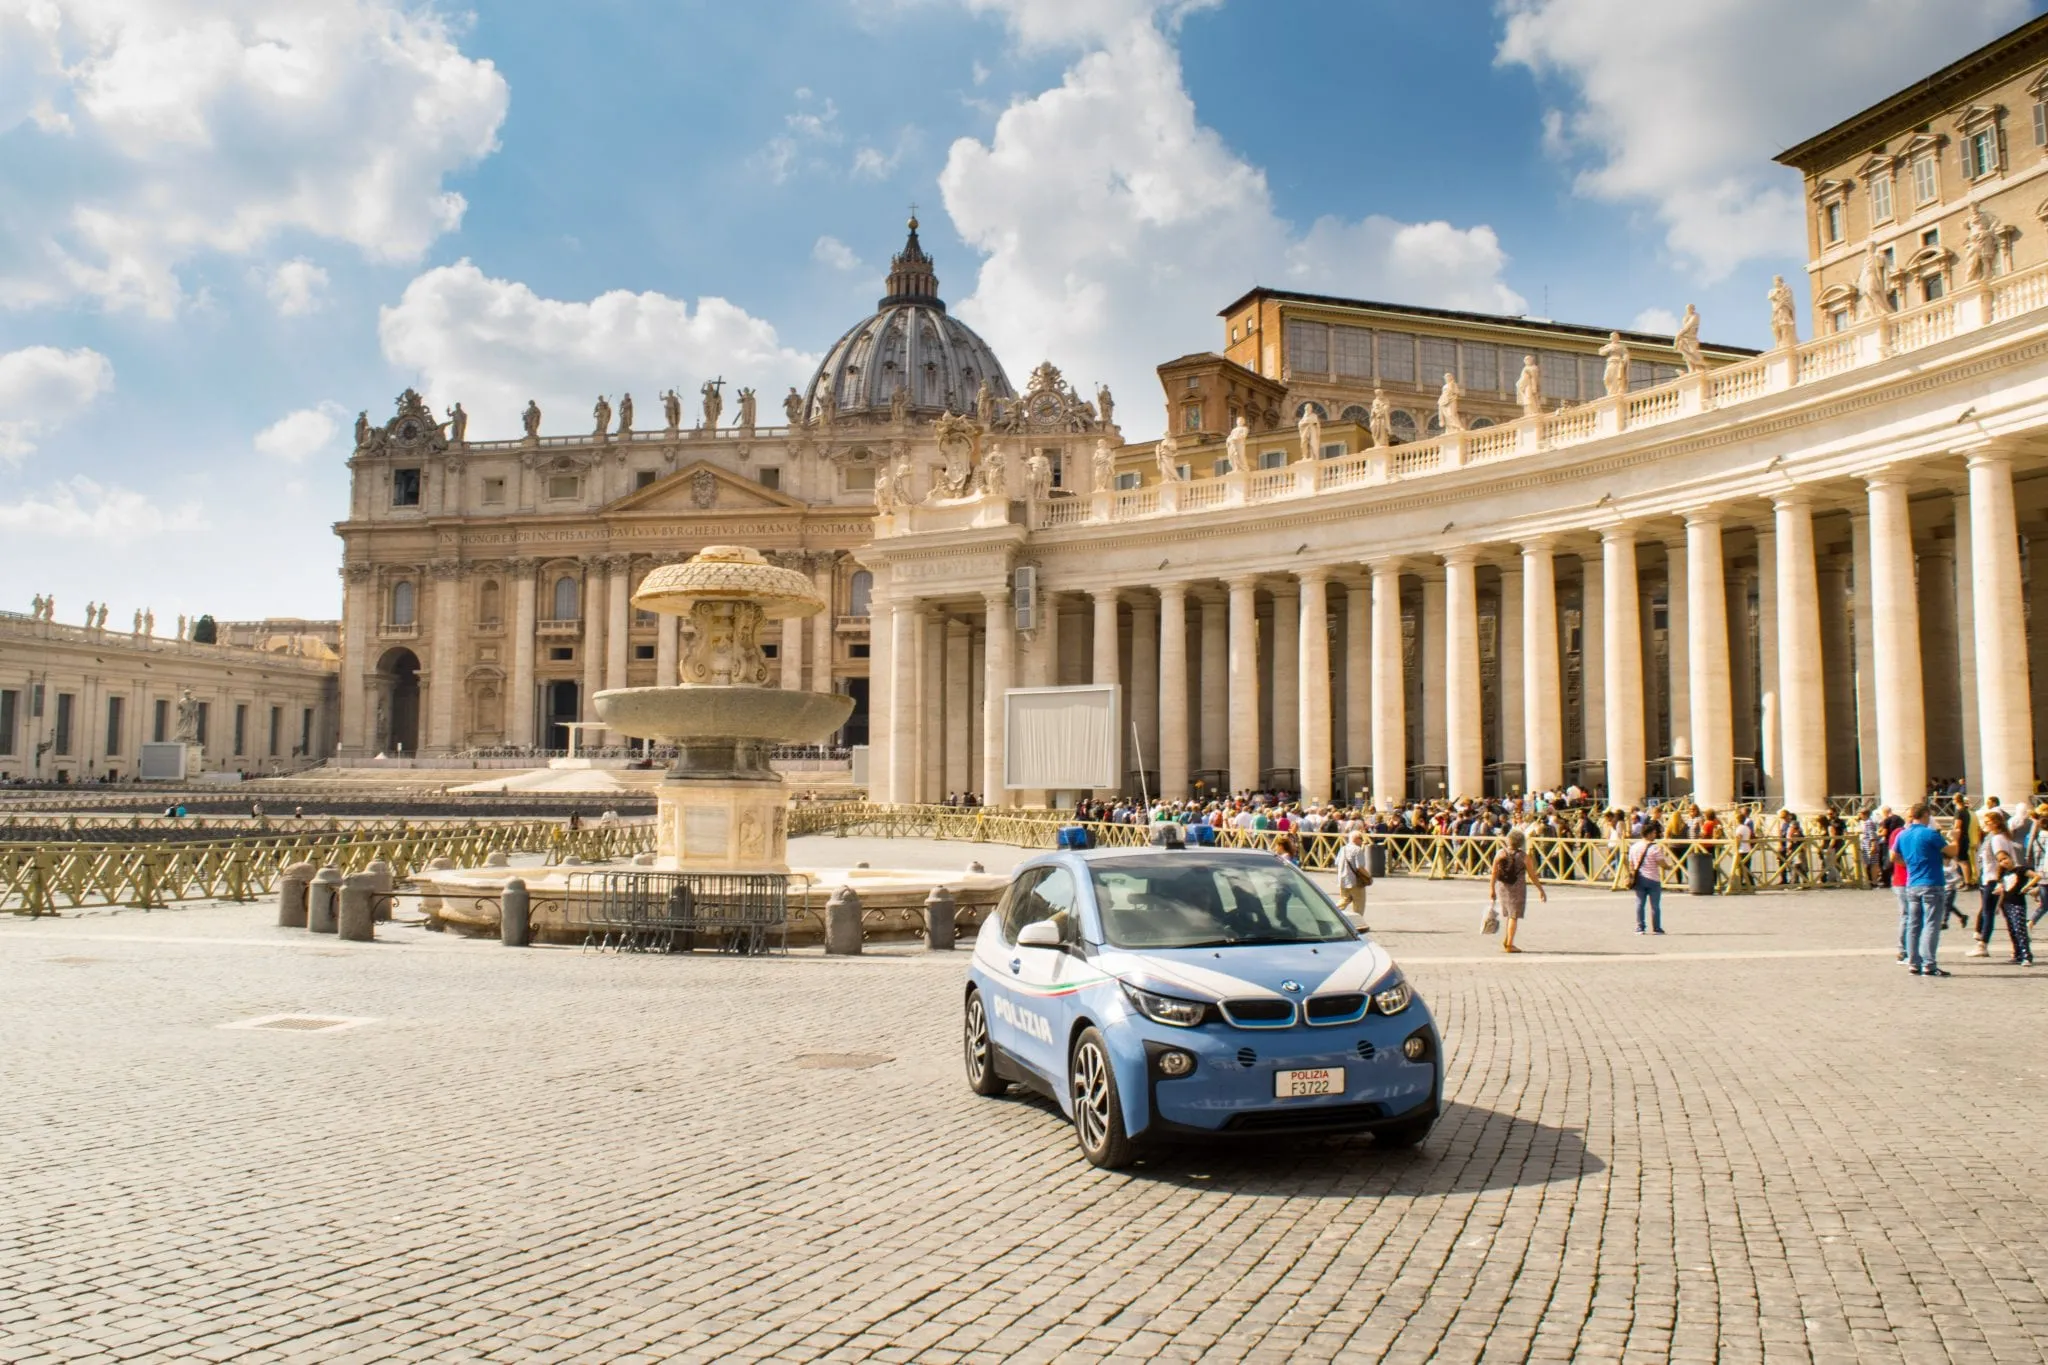 St Peter's Square on sunny day with car parked in the square--checking out this square is a must-see when touring Vatican City!